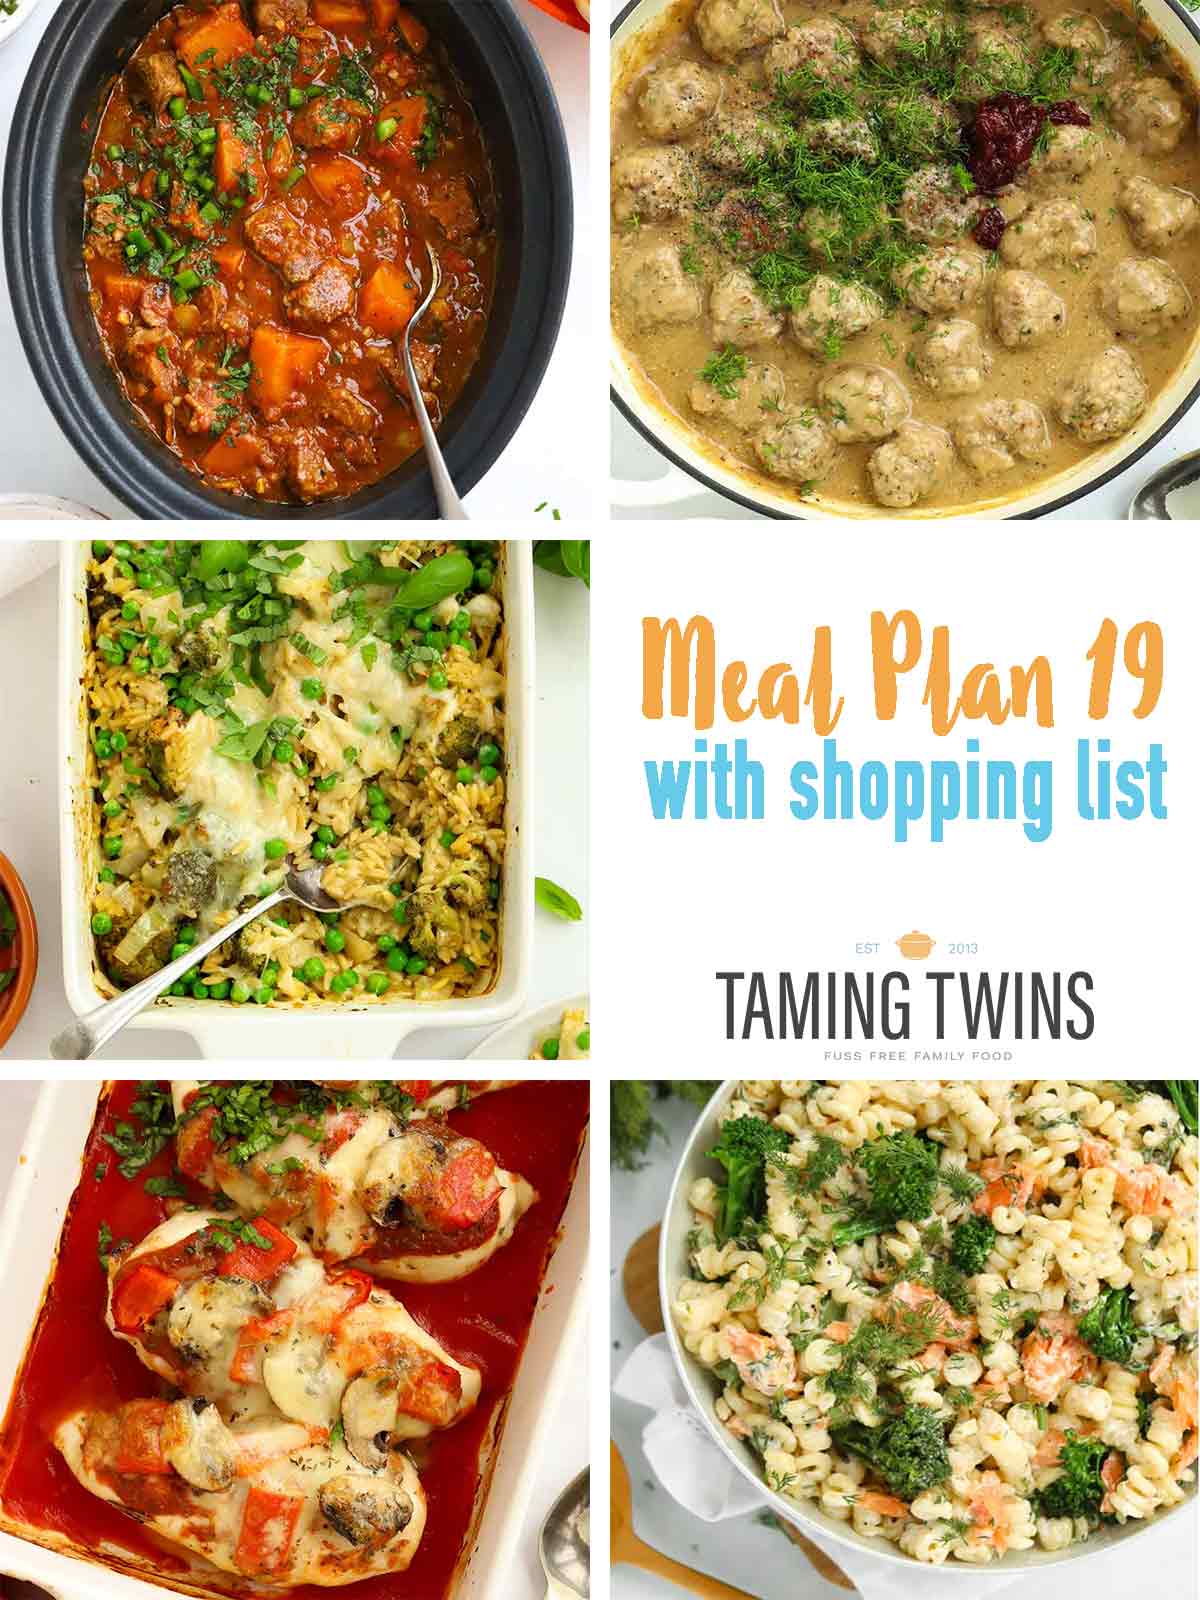 Five recipes for meal plan 19, finished recipes collage.